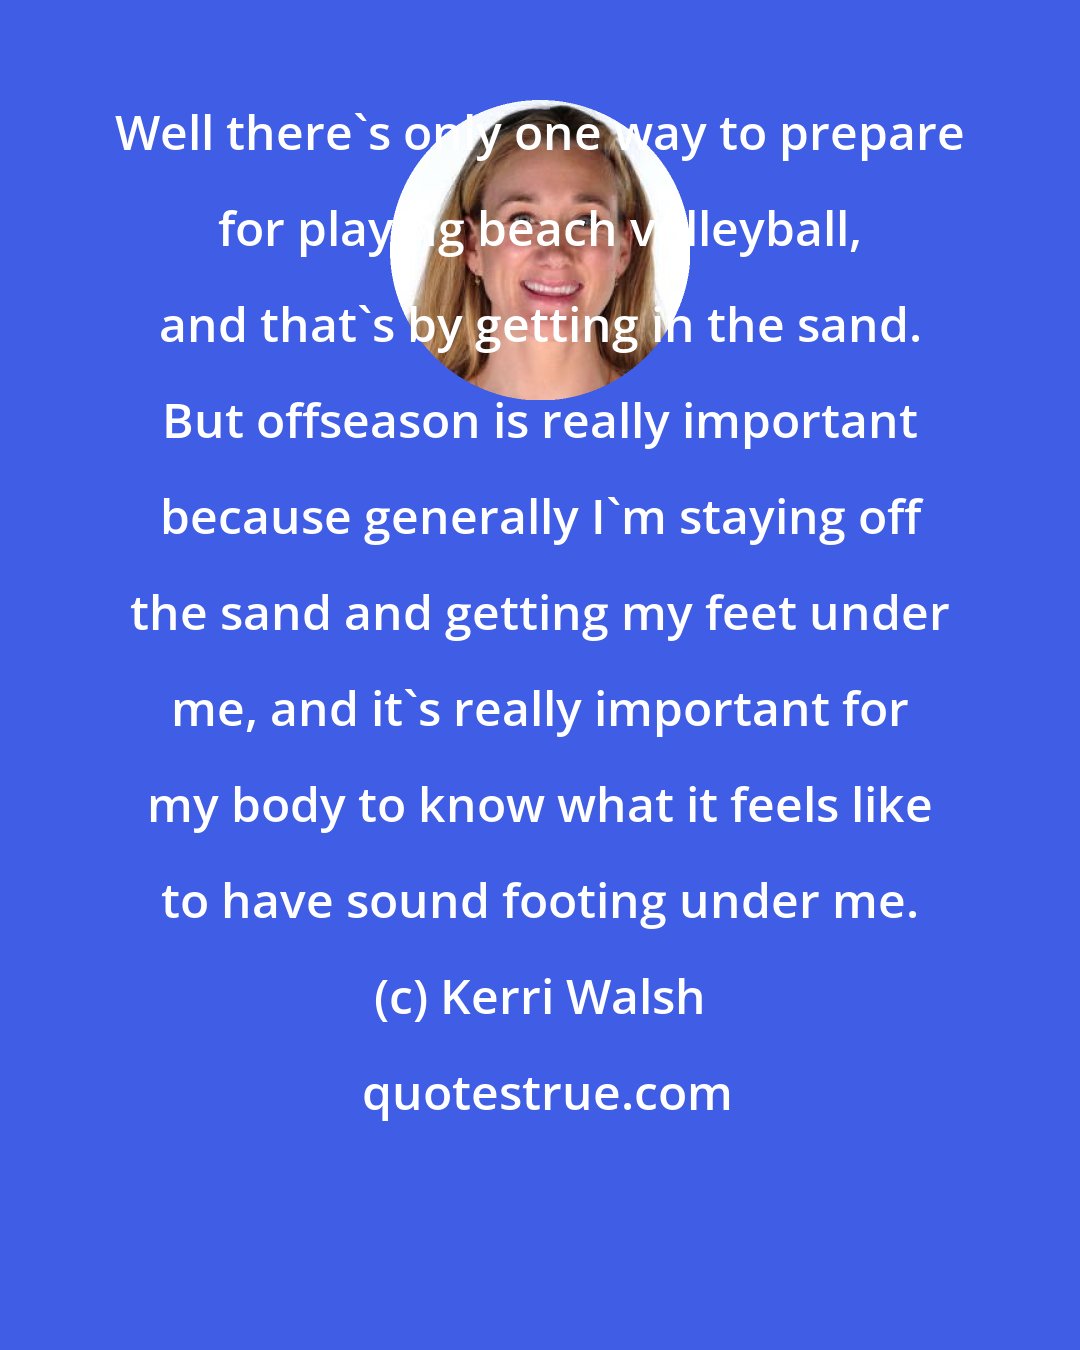 Kerri Walsh: Well there's only one way to prepare for playing beach volleyball, and that's by getting in the sand. But offseason is really important because generally I'm staying off the sand and getting my feet under me, and it's really important for my body to know what it feels like to have sound footing under me.